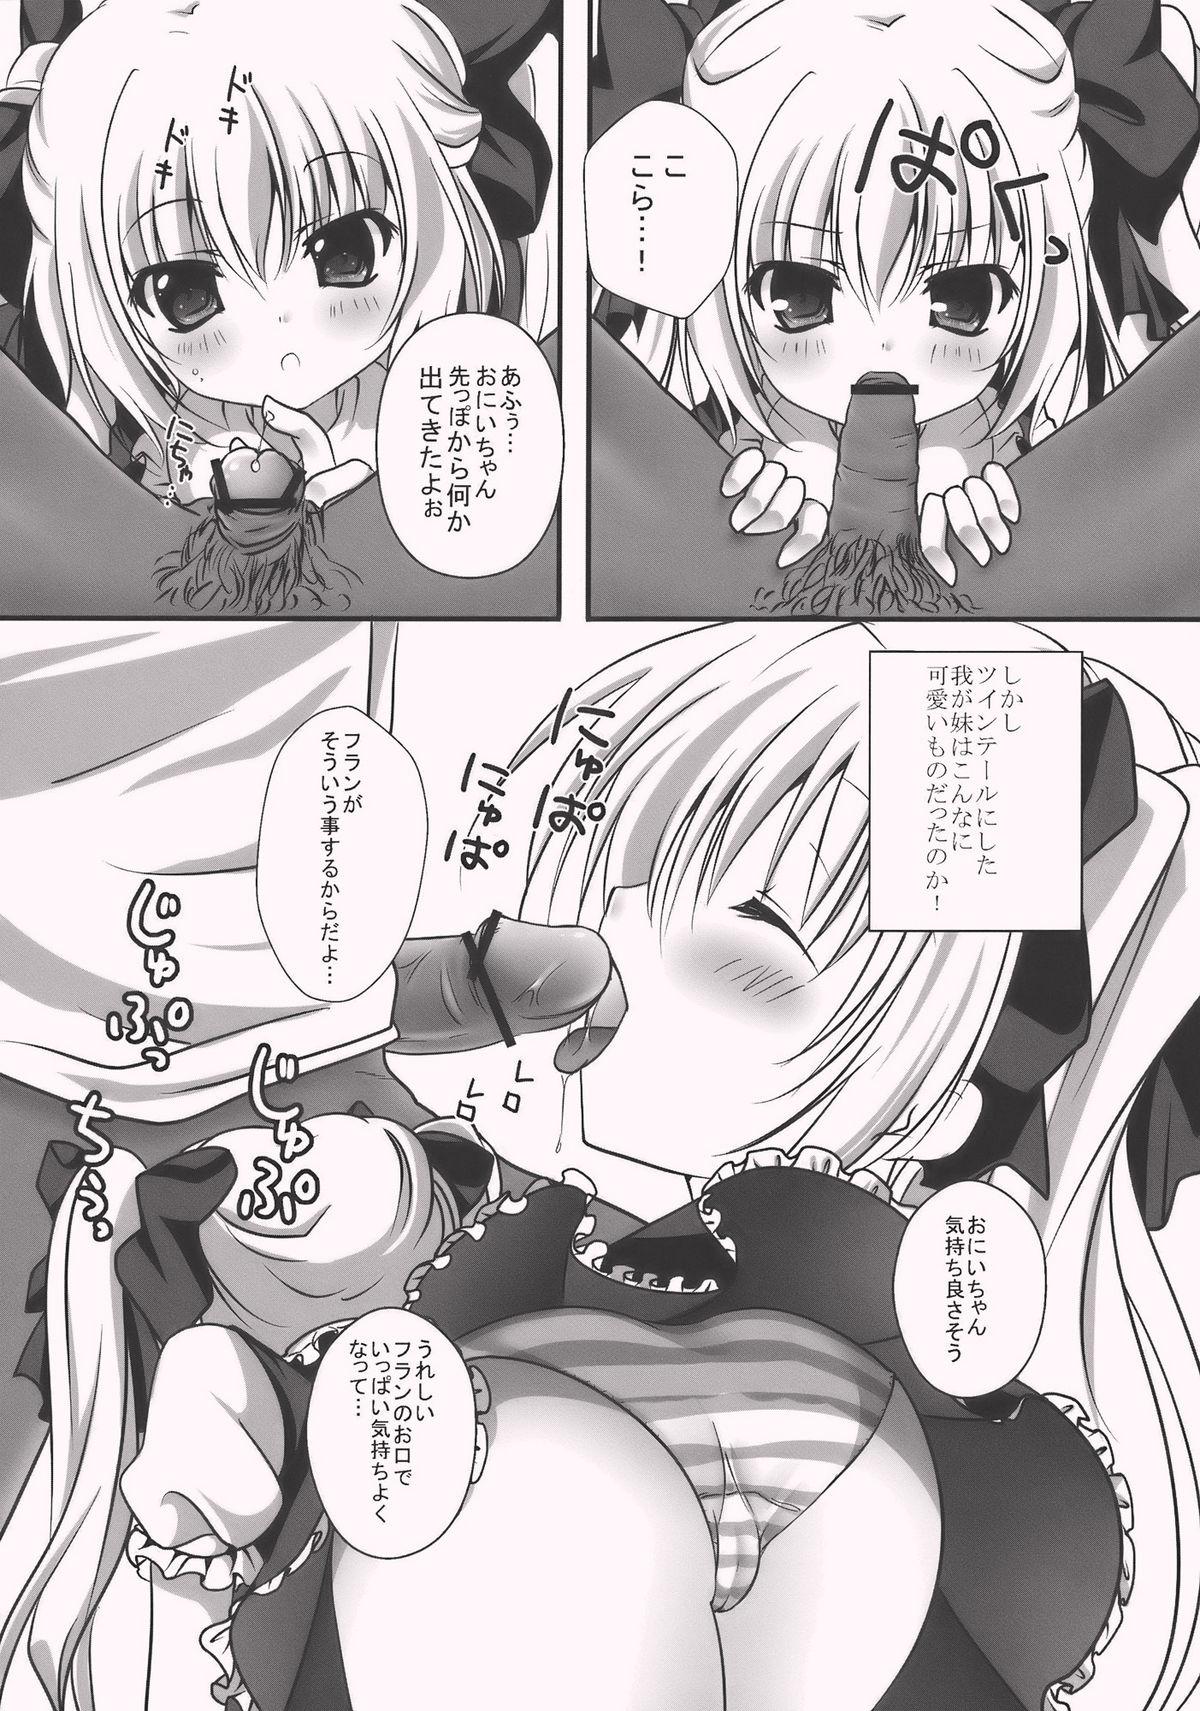 Chica Imouto Twin Tail Flan-chan - Touhou project Amatuer - Page 8